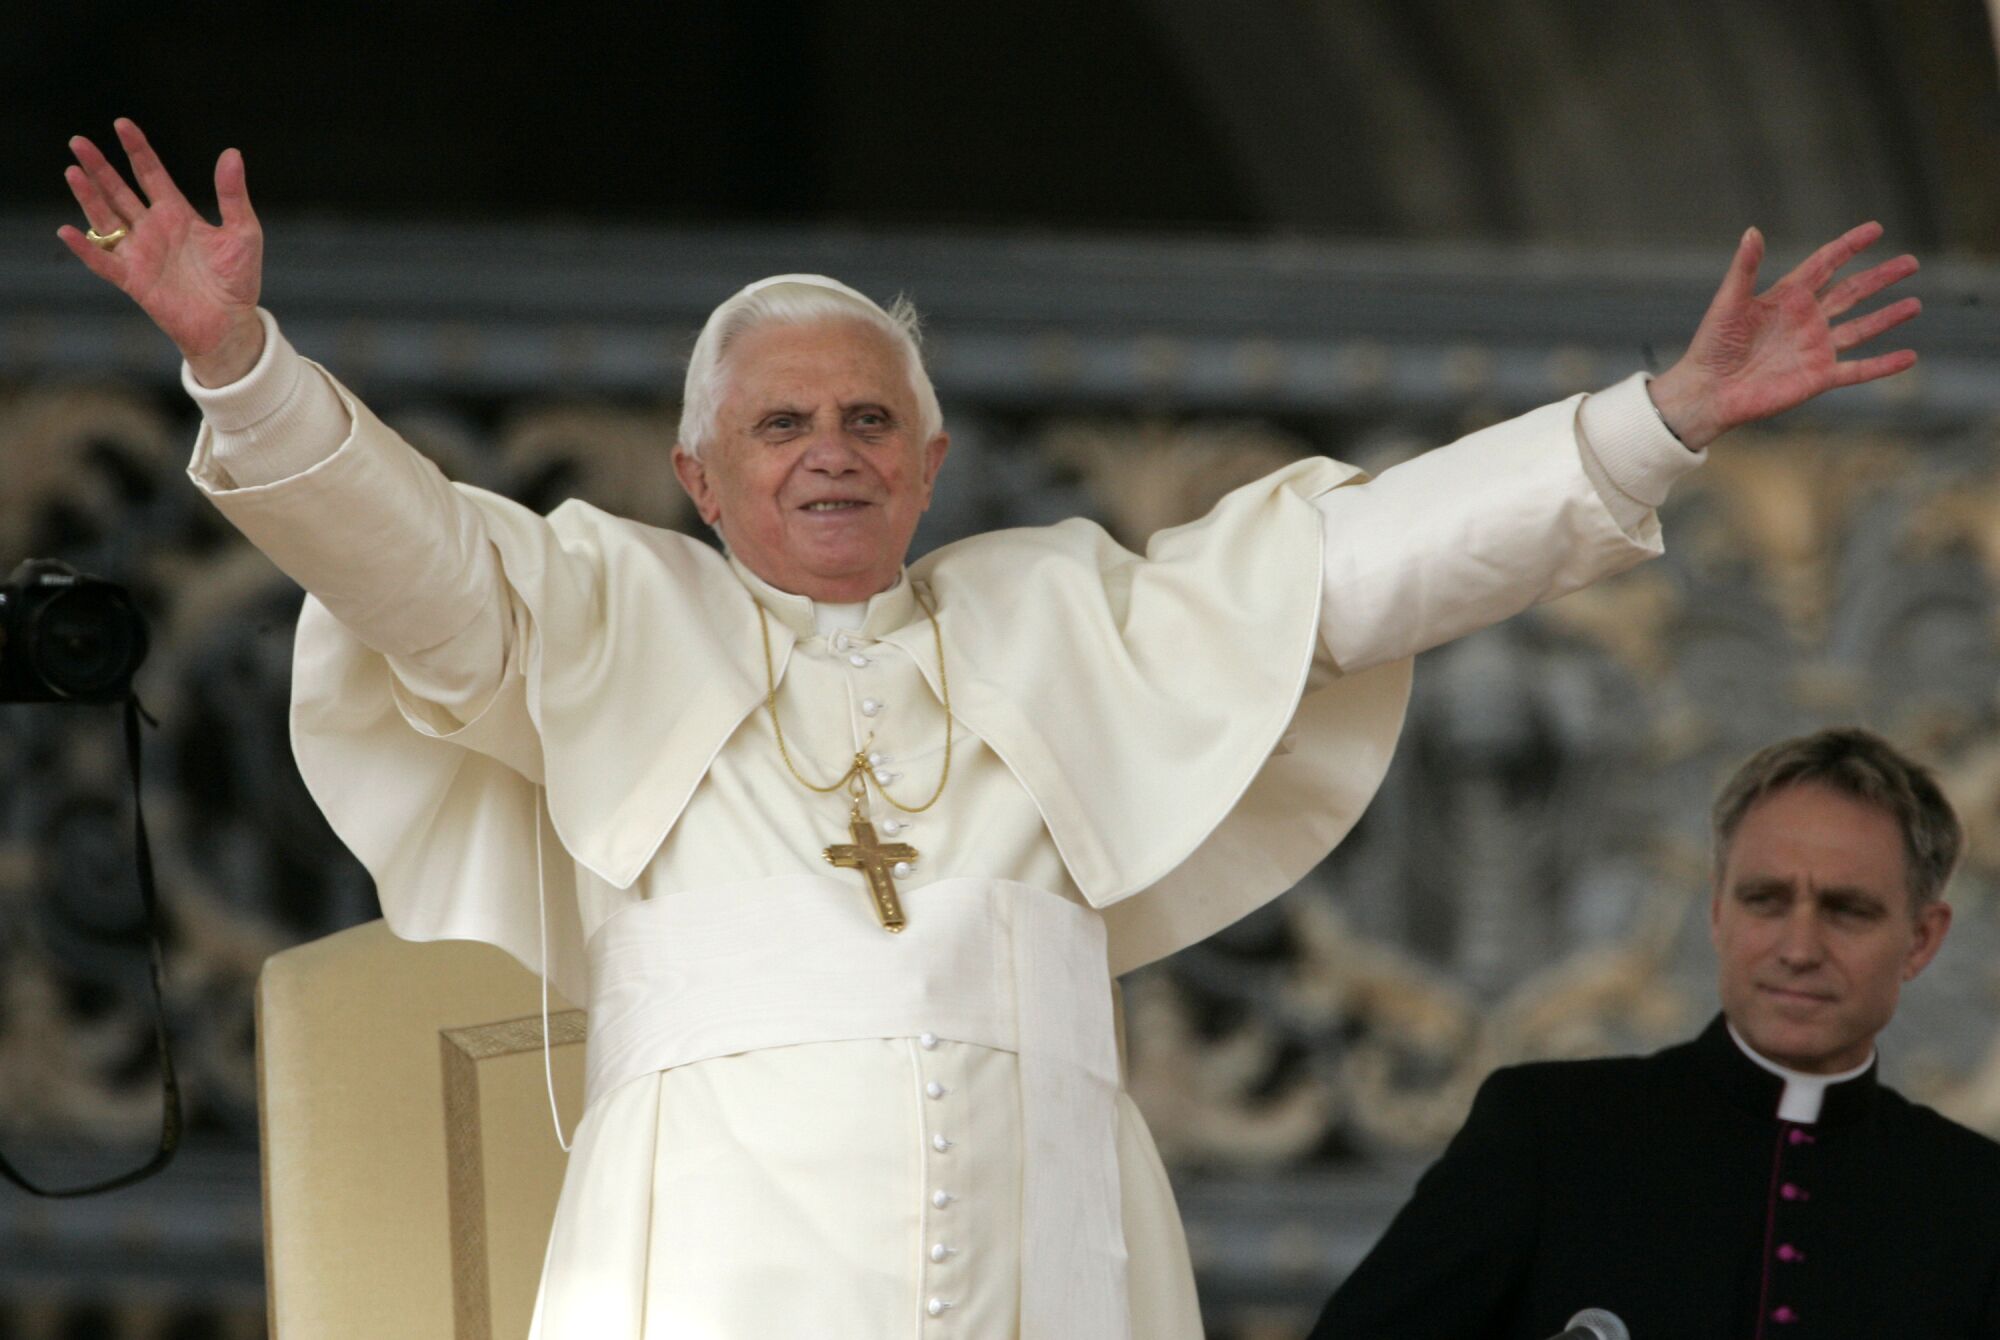 Pope Benedict XVI raises his arms while another man looks on.